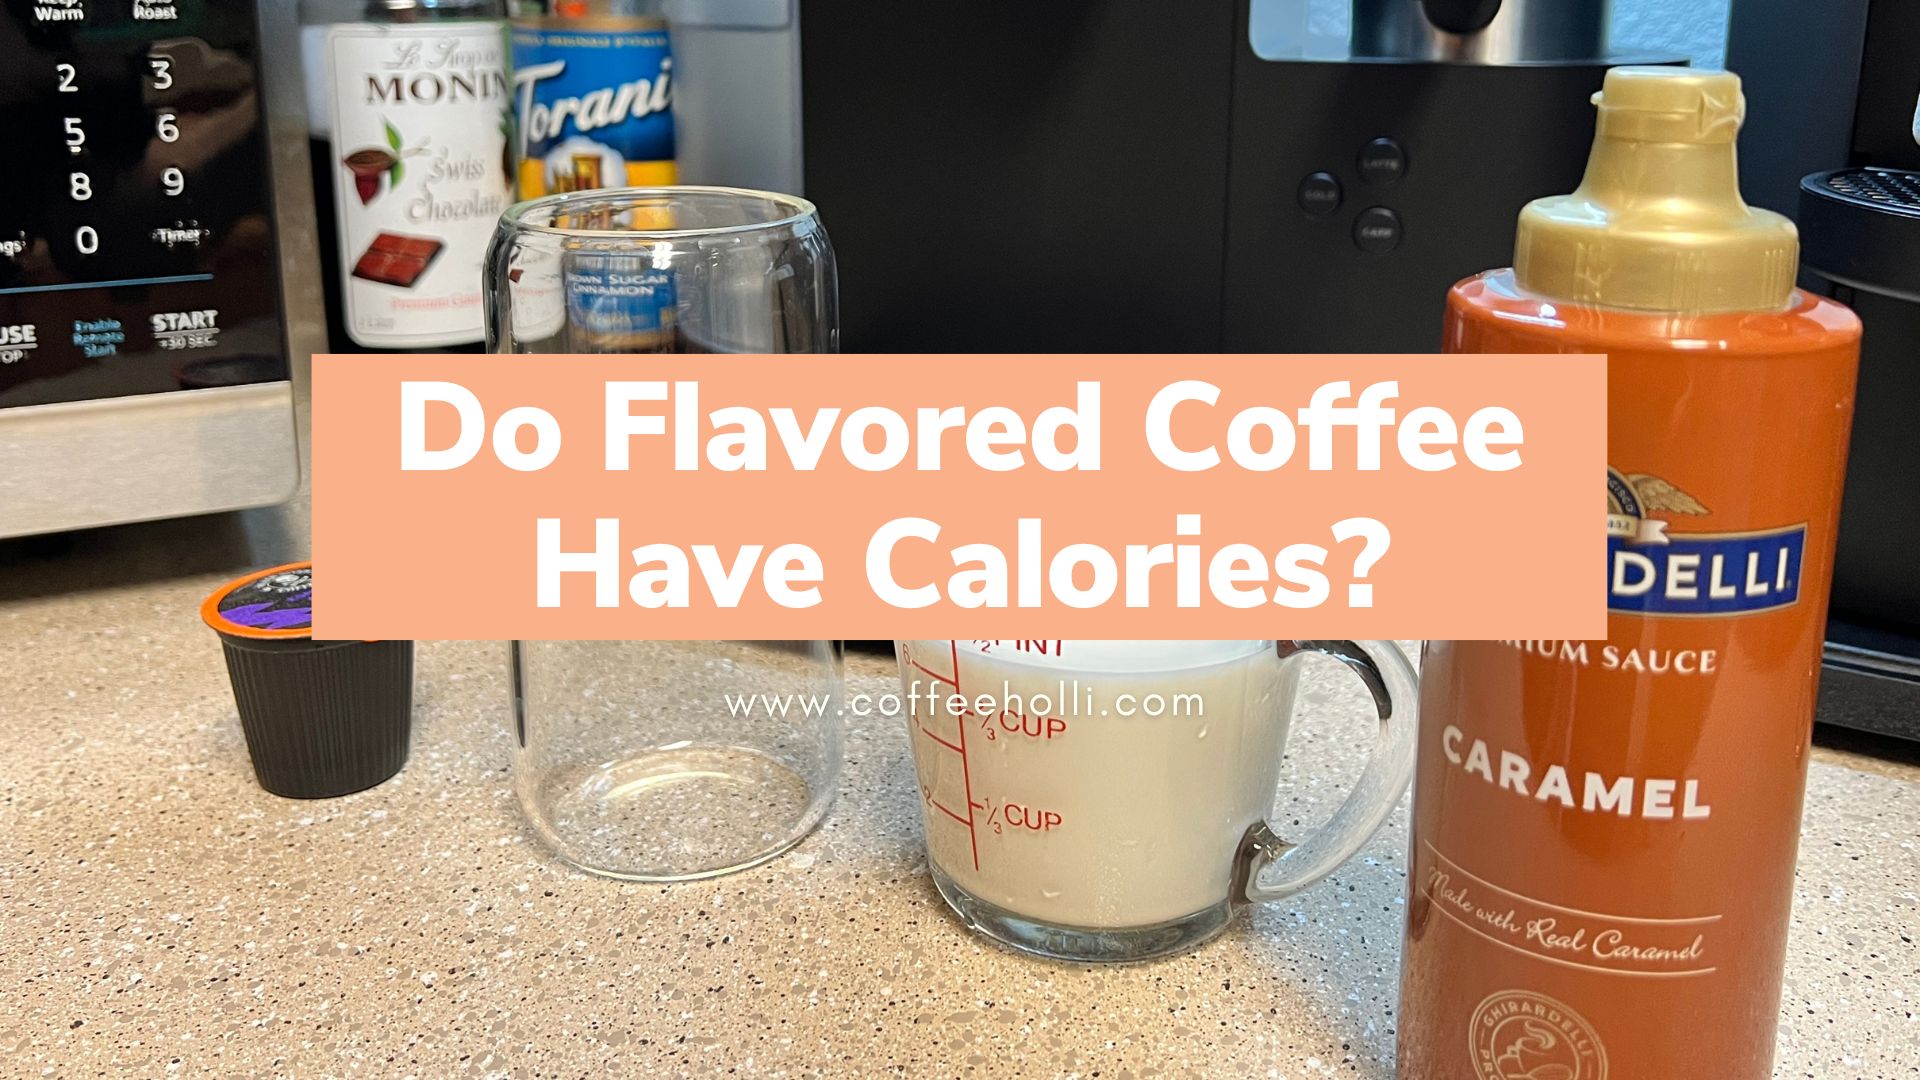 Do Flavored Coffee Have Calories